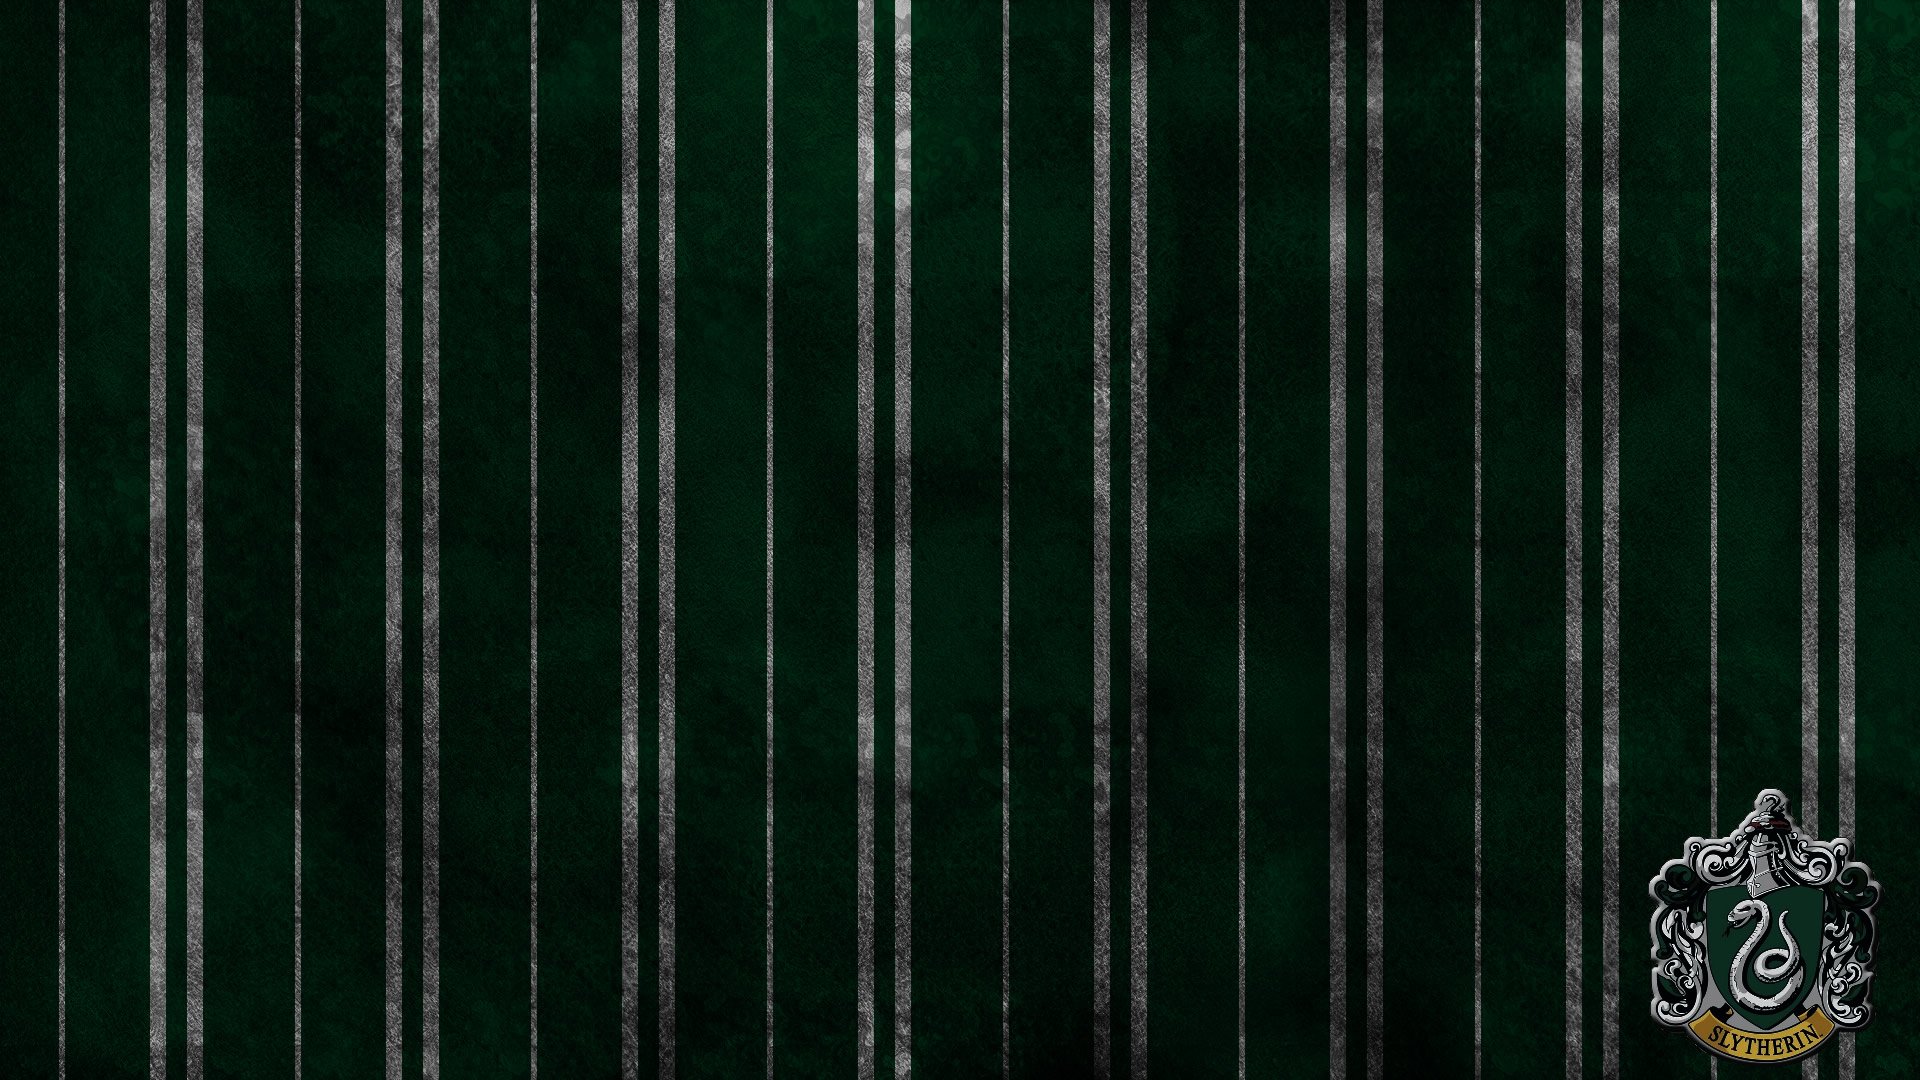 slytherin wallpapers hd stay staywallpaper